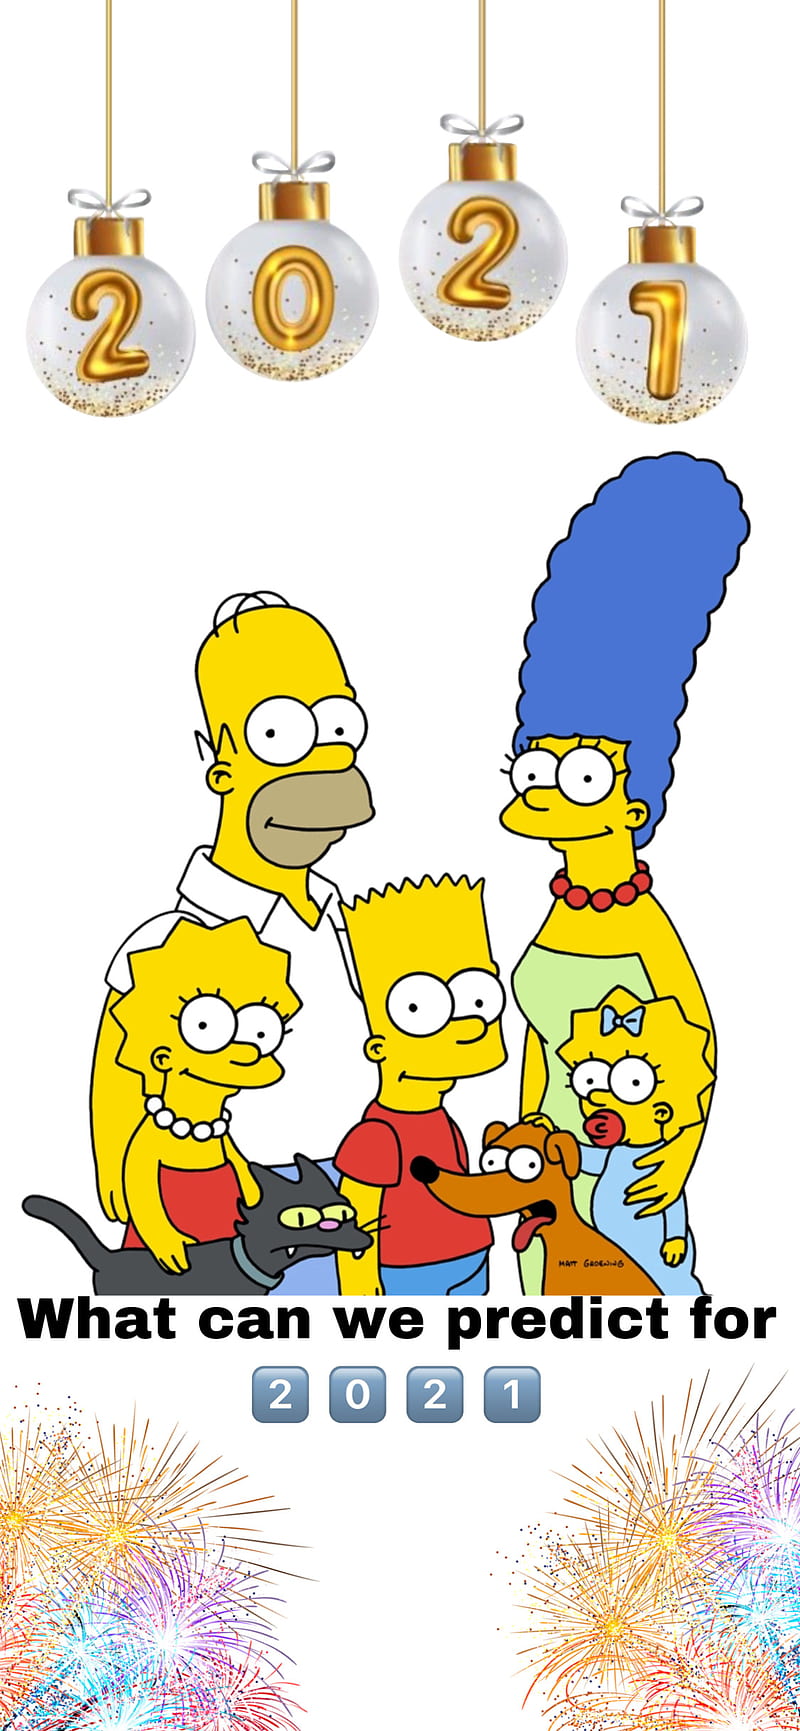 1080P free download The Simpsons 2021, 2020, 2021, 2023, 2024, 2025